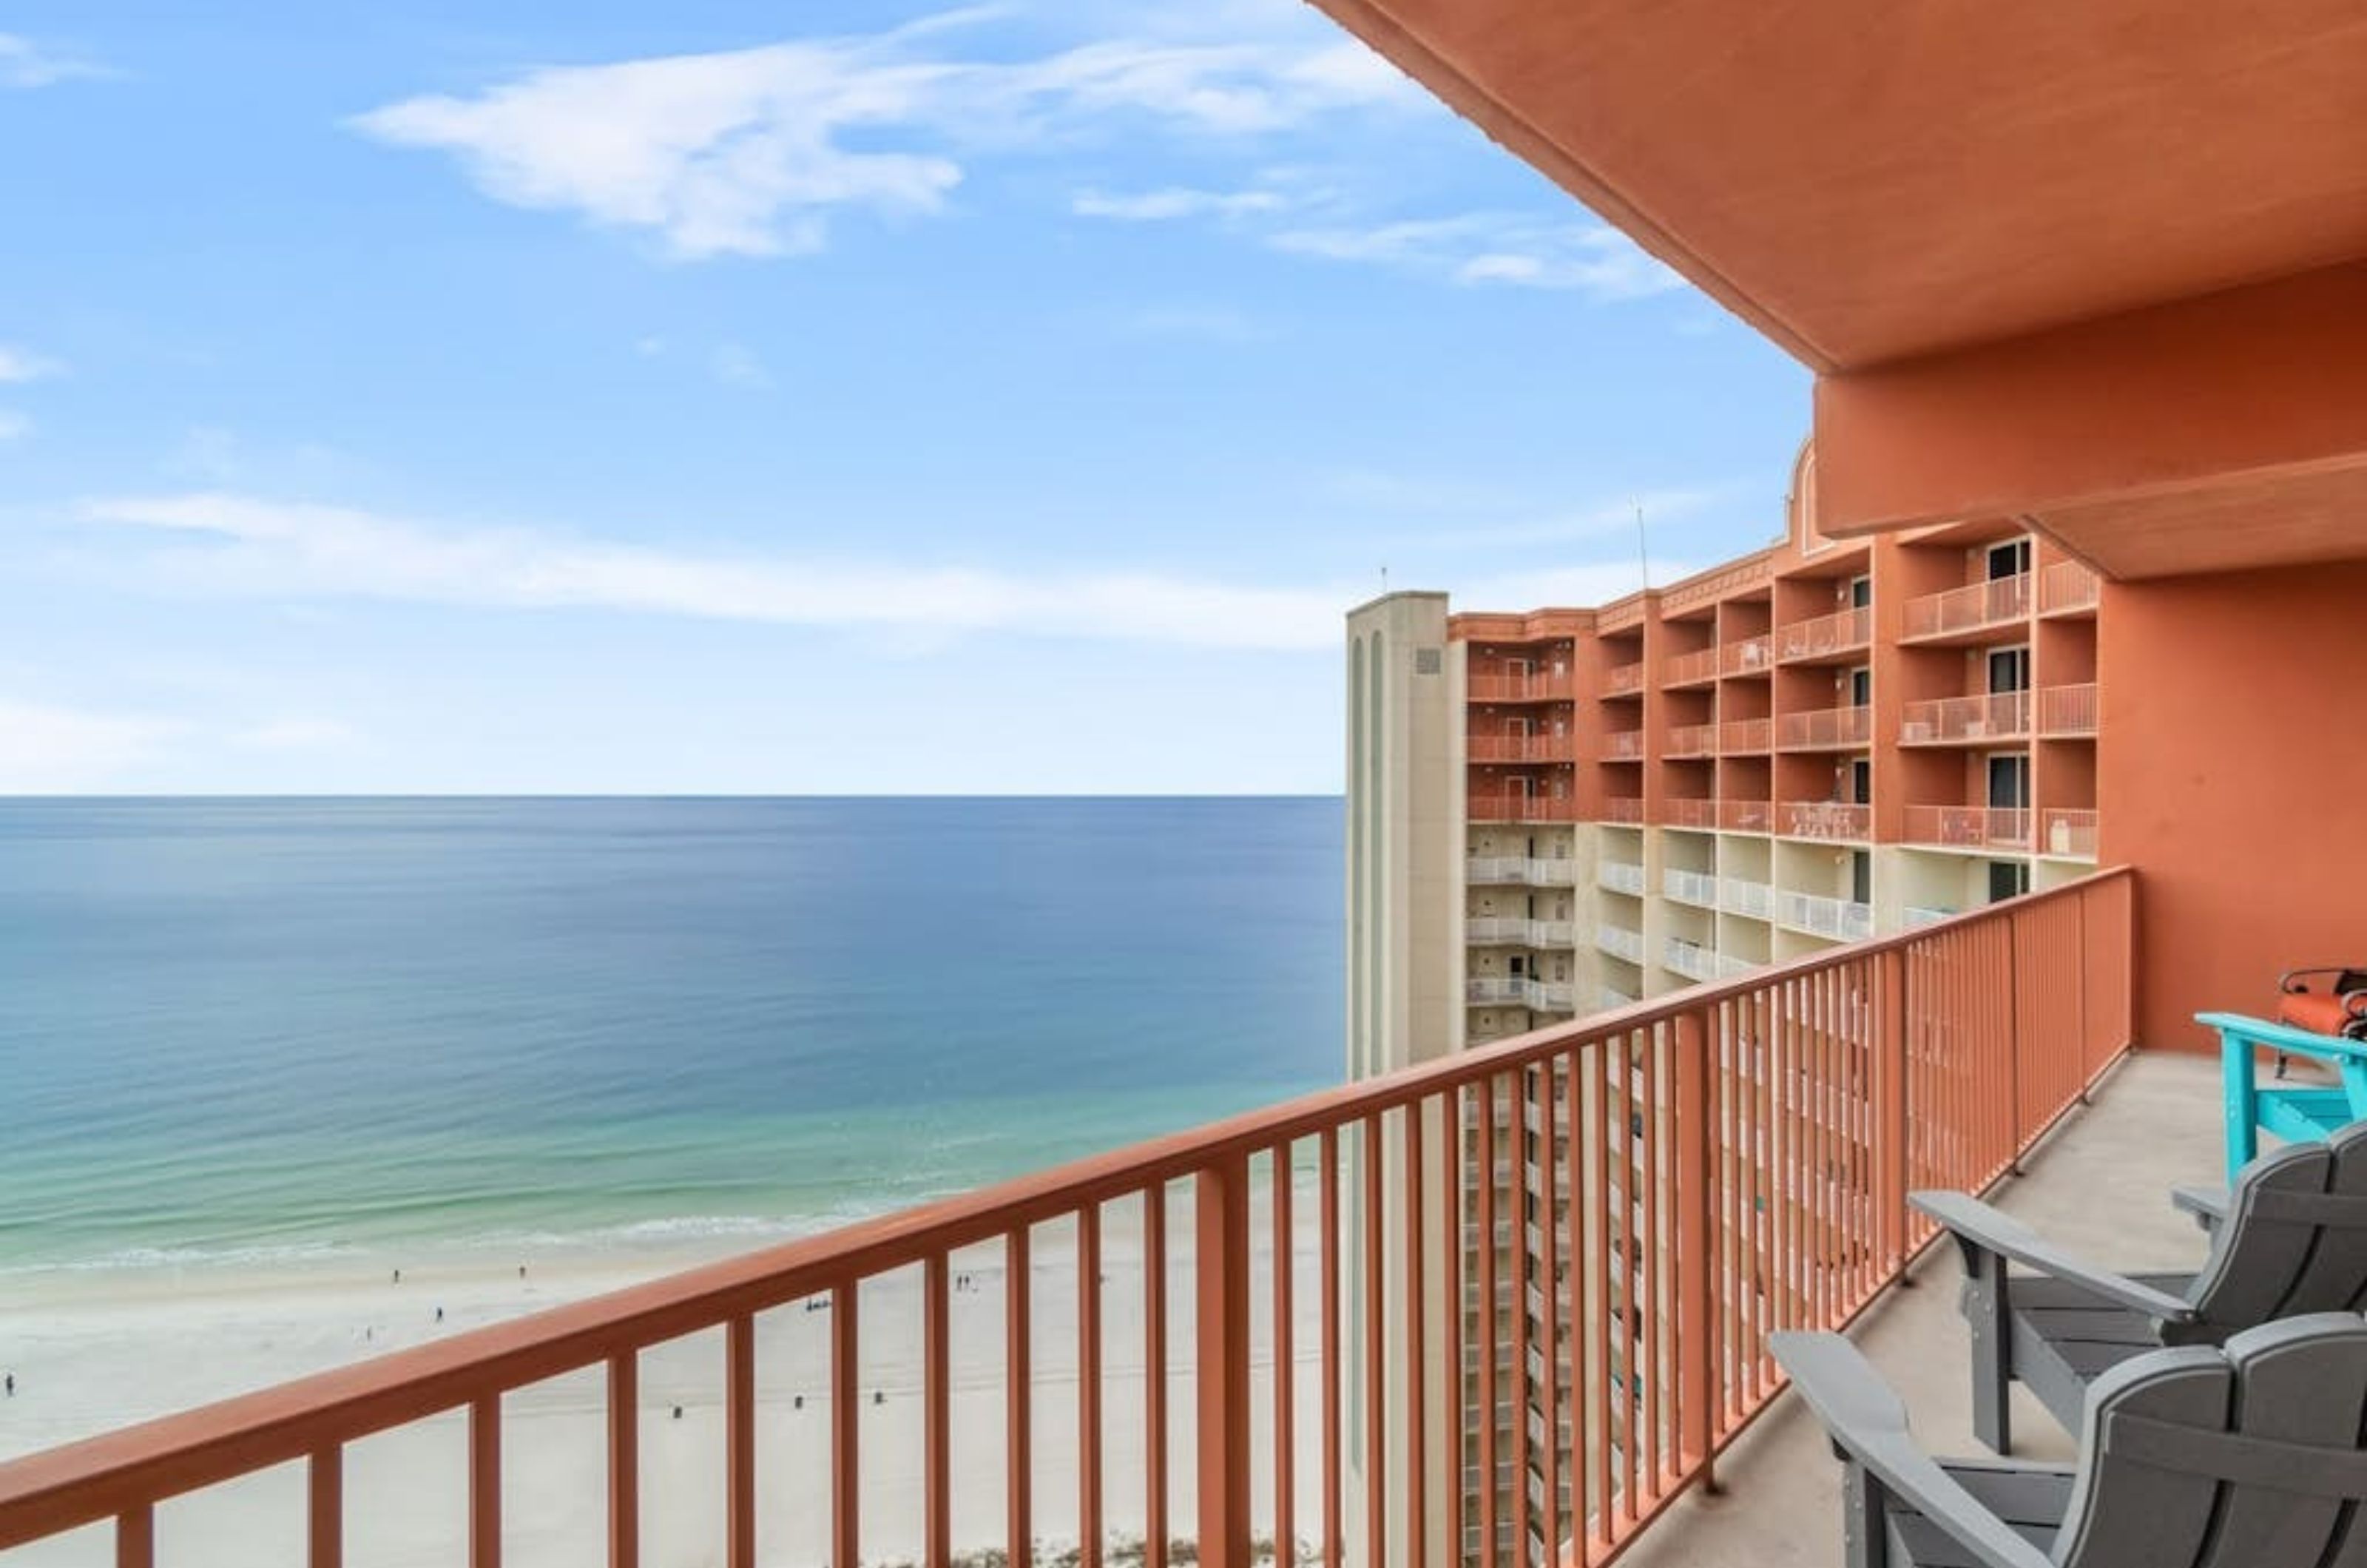 A private balcony overlooking the Gulf at the Shores of Panama Resort in Panama City Beach Florida 